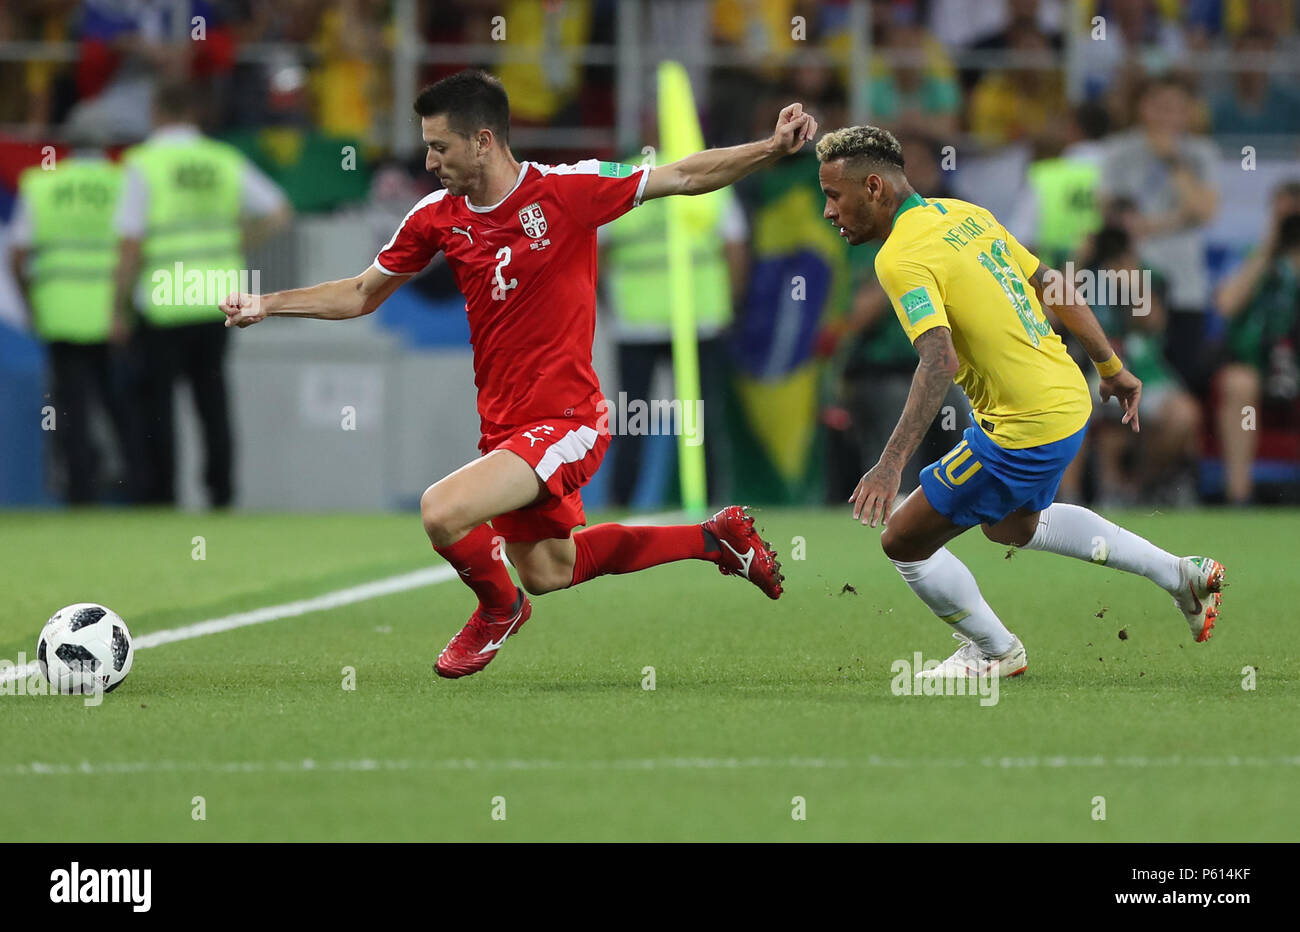 Moscow, Russia. 27th June, 2018. Neymar (R) of Brazil vies with Antonio Rukavina of Serbia during the 2018 FIFA World Cup Group E match between Serbia and Brazil in Moscow, Russia, June 27, 2018. Brazil won 2-0 and advanced to the round of 16. Credit: Xu Zijian/Xinhua/Alamy Live News Stock Photo